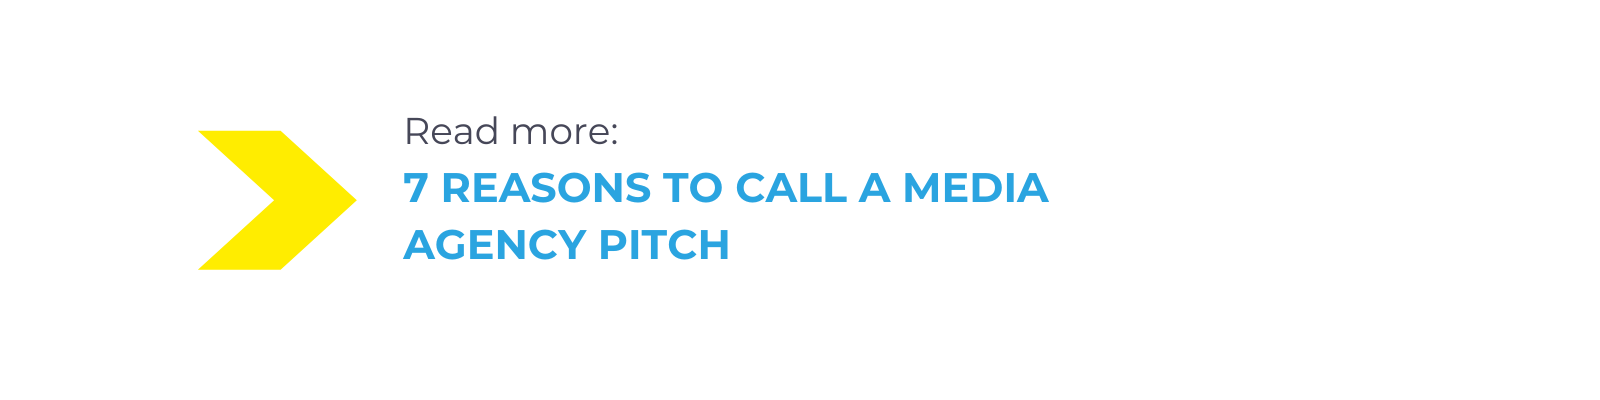 7 Reasons to Call a Media Agency Pitch